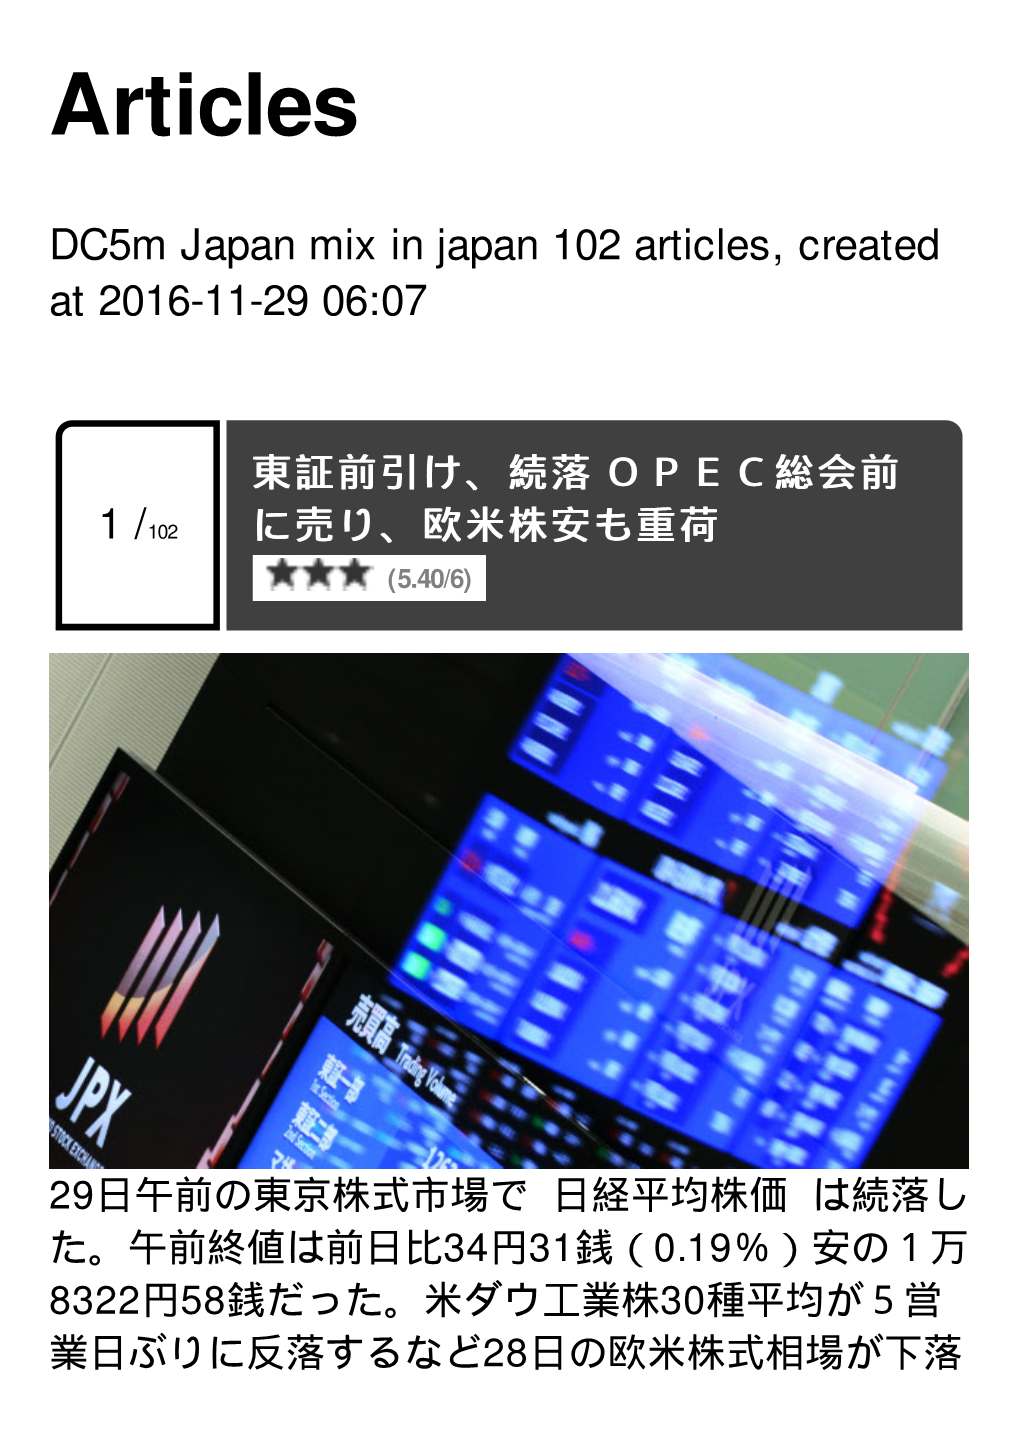 Dc5m Japan Mix in Japan Created at 2016-11-29 06:07